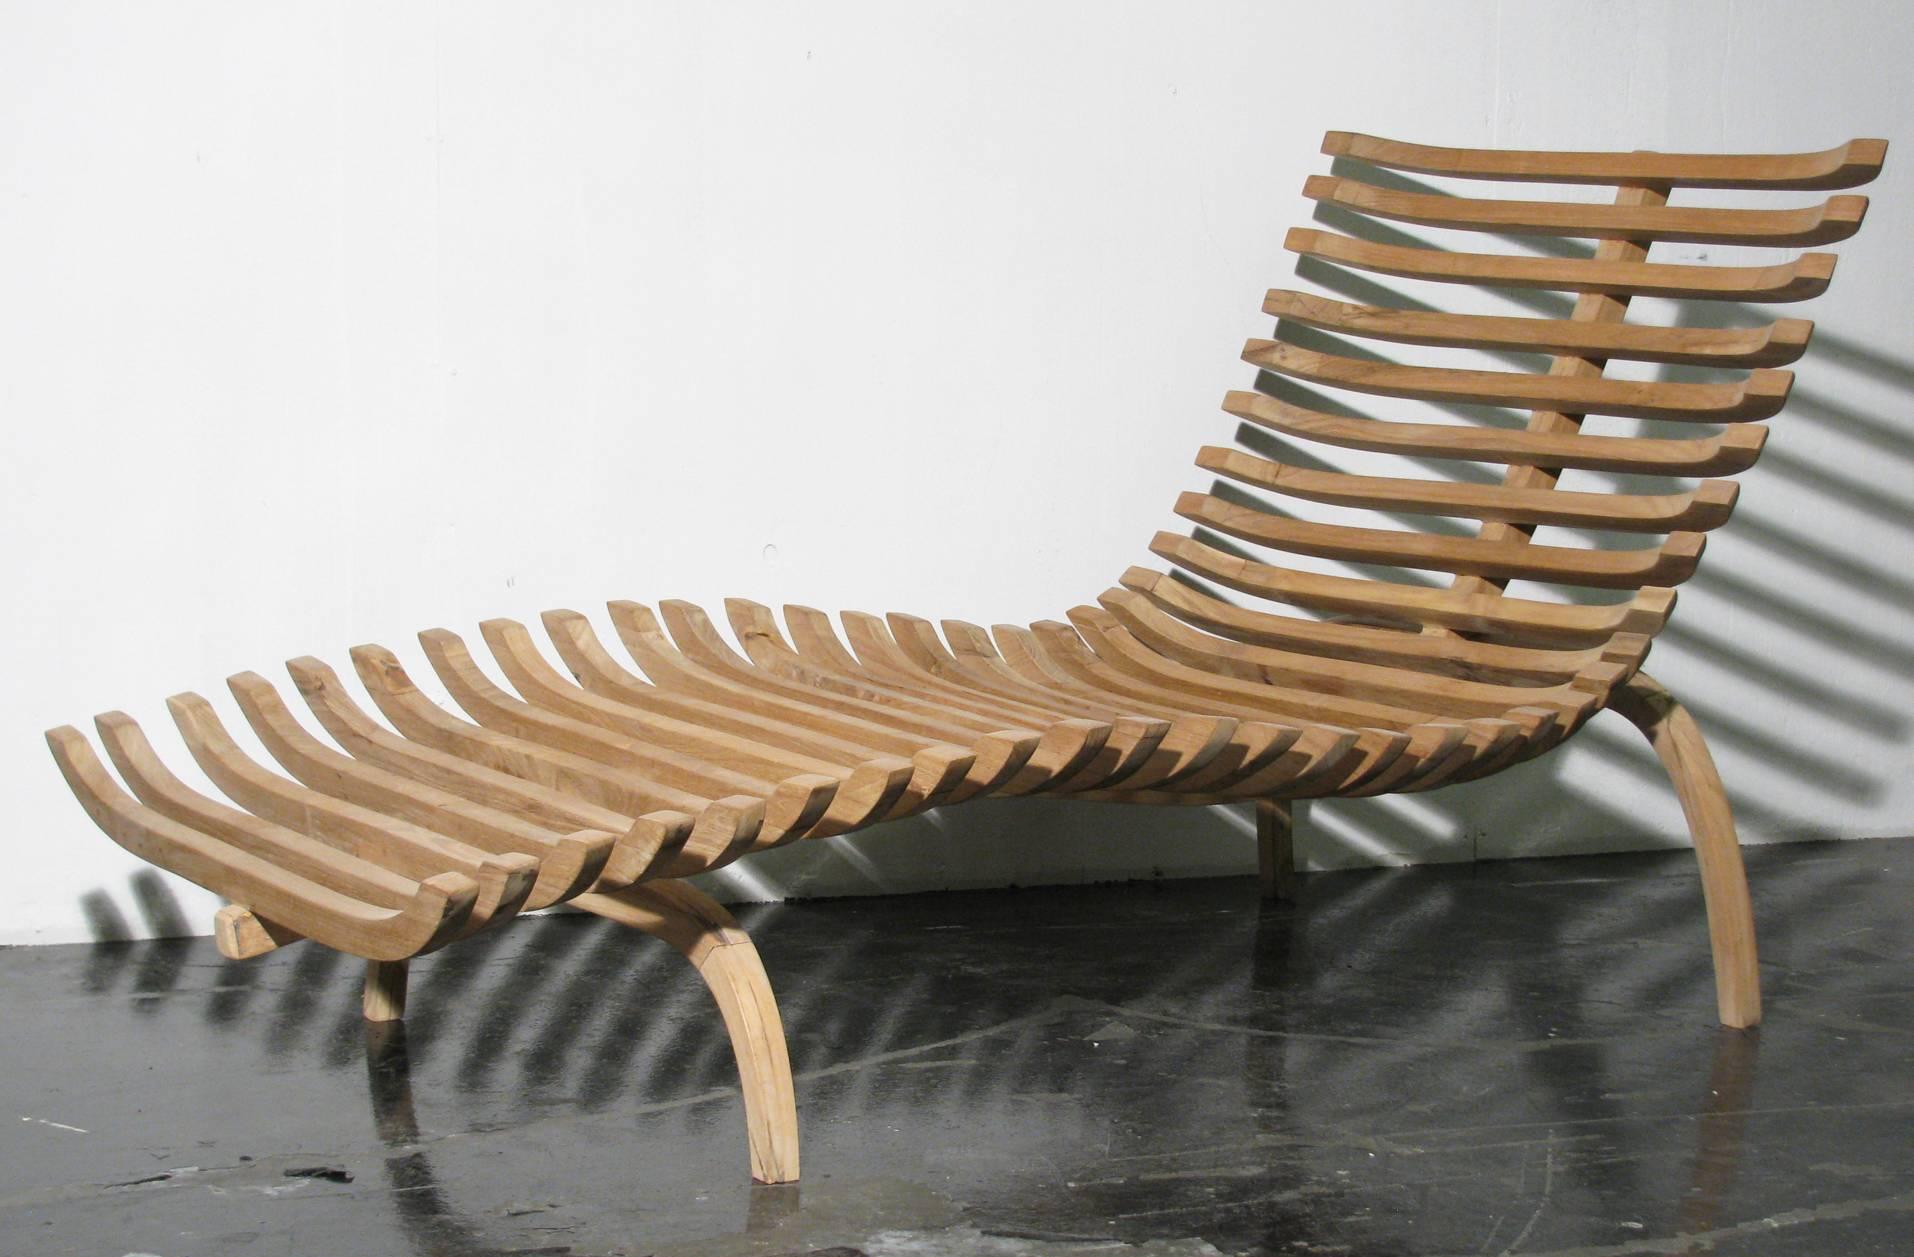 Sculptural chaise longue constructed of solid teakwood with steel core reinforcement on all bands and frame base. Natural wax finish. Pure and organic form.